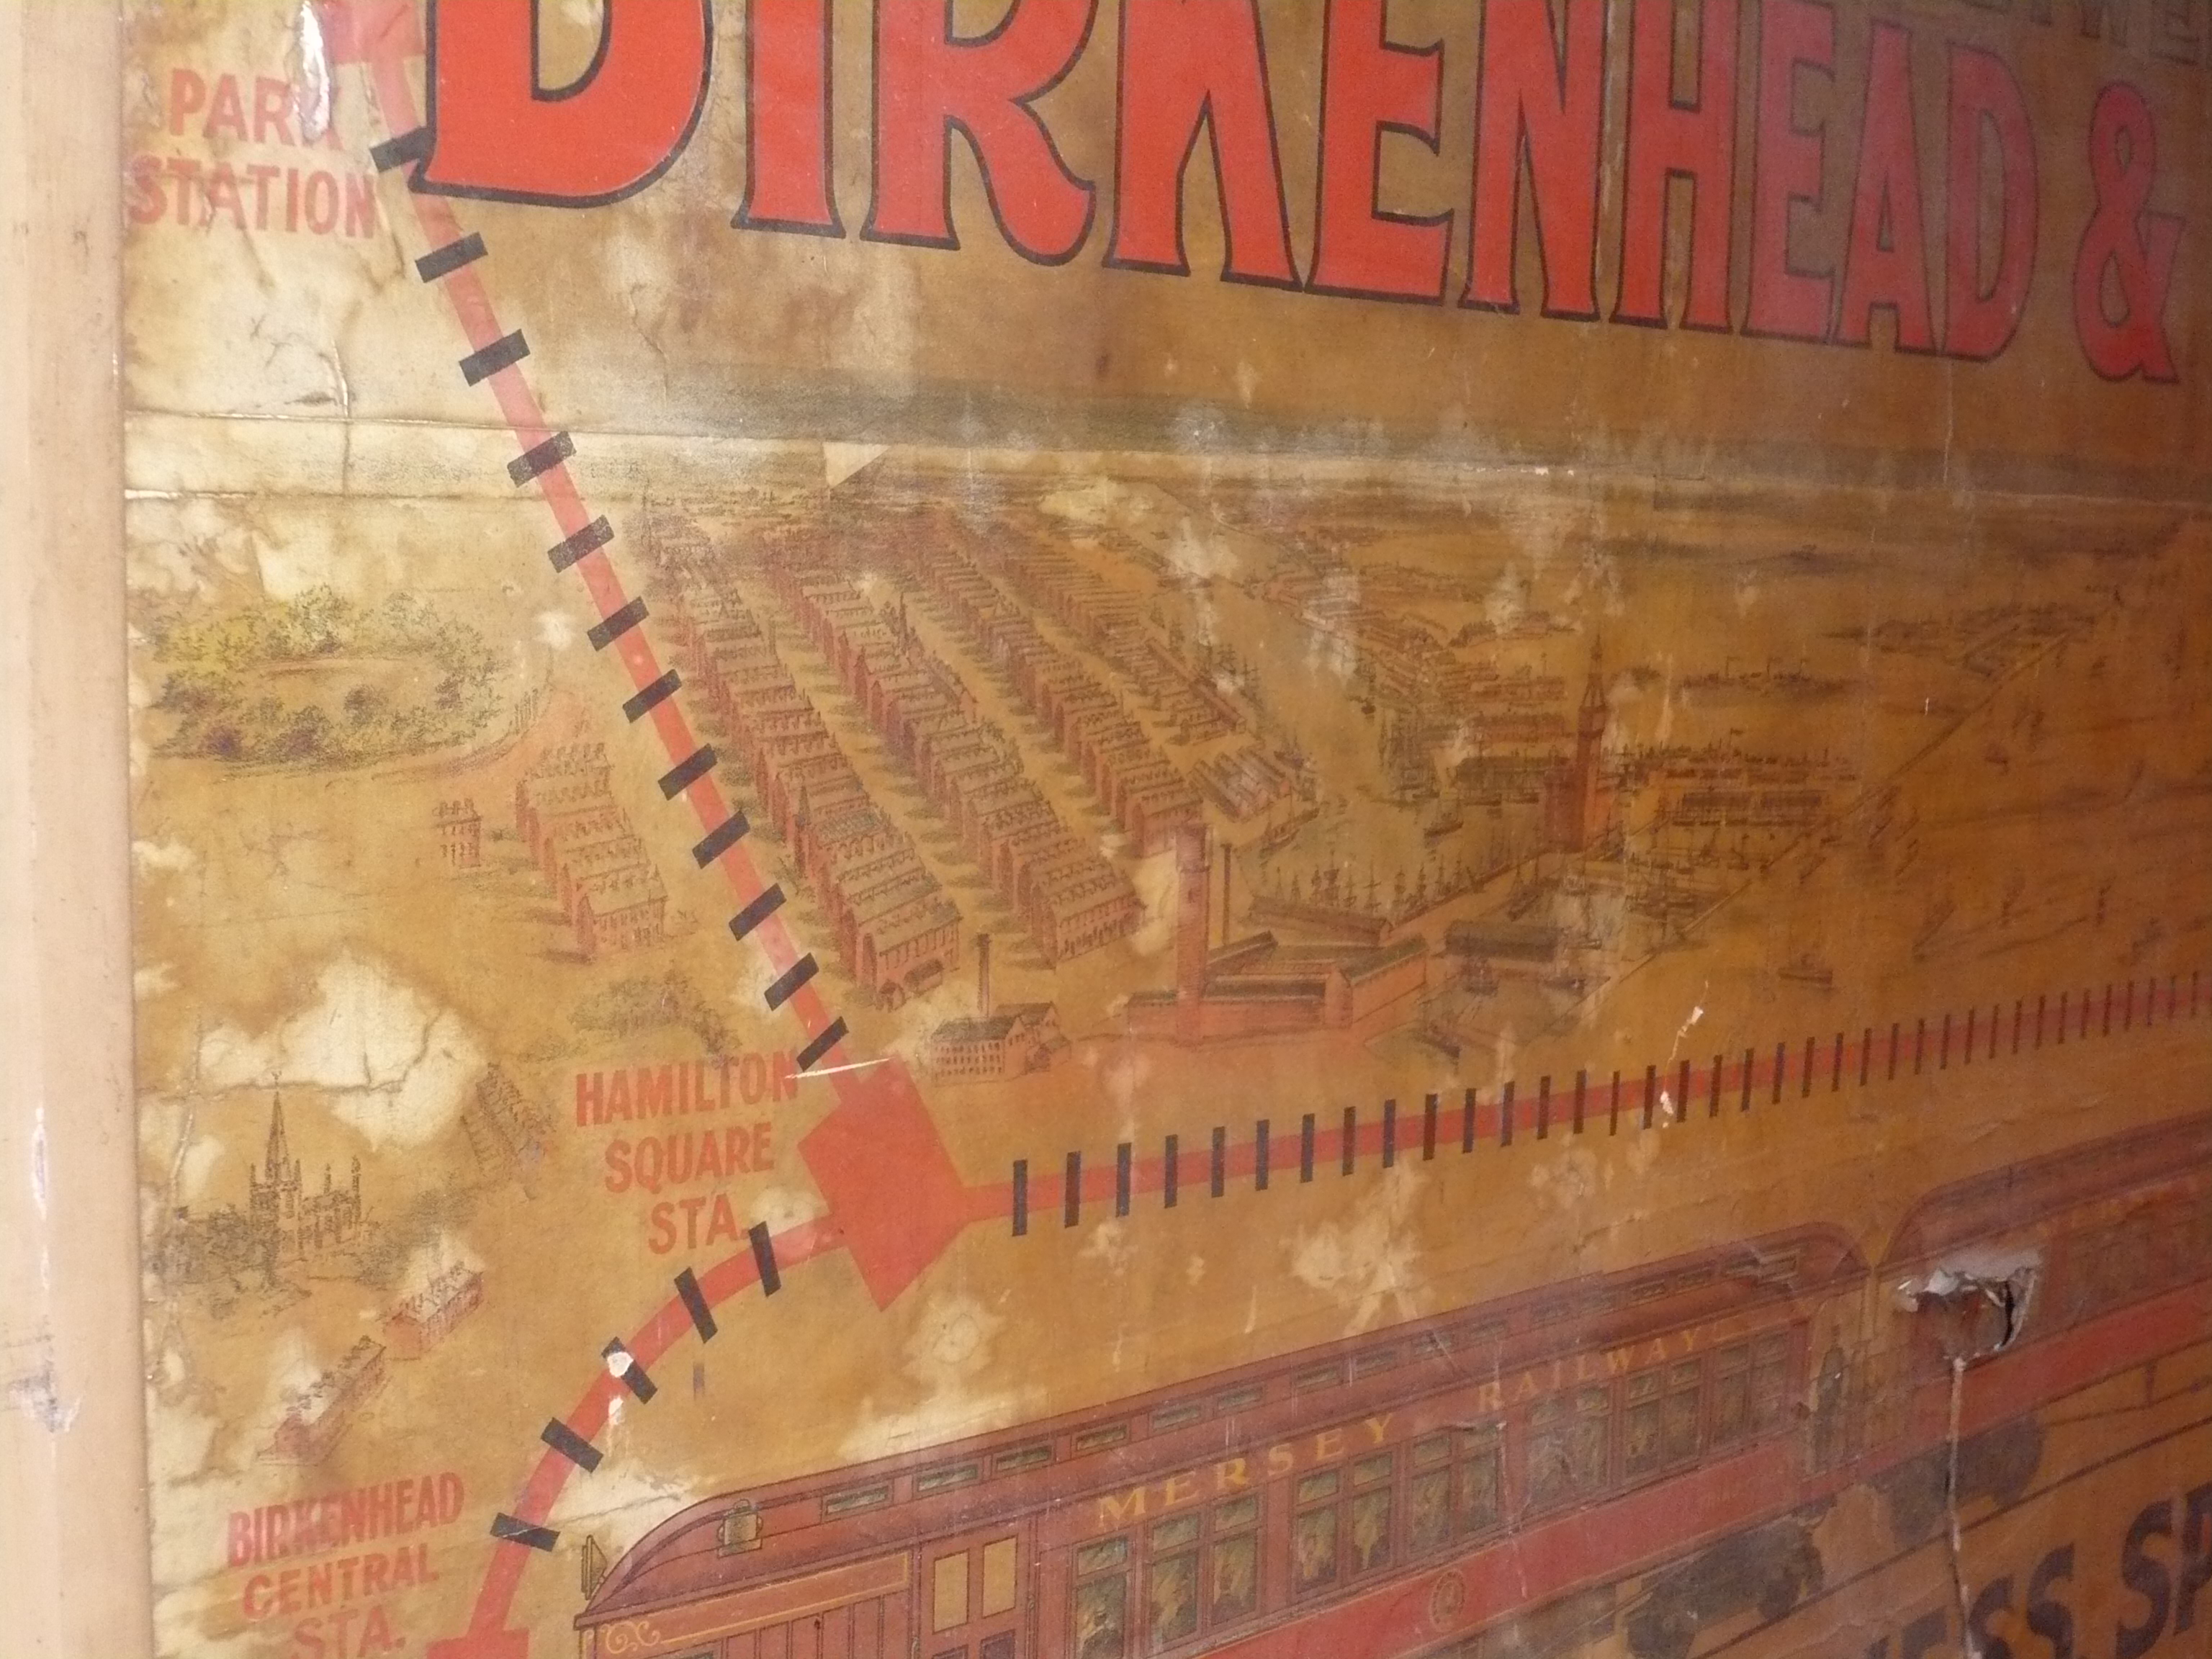 Mersey Railway poster, detail, showing dirt and damage, Sept 2011